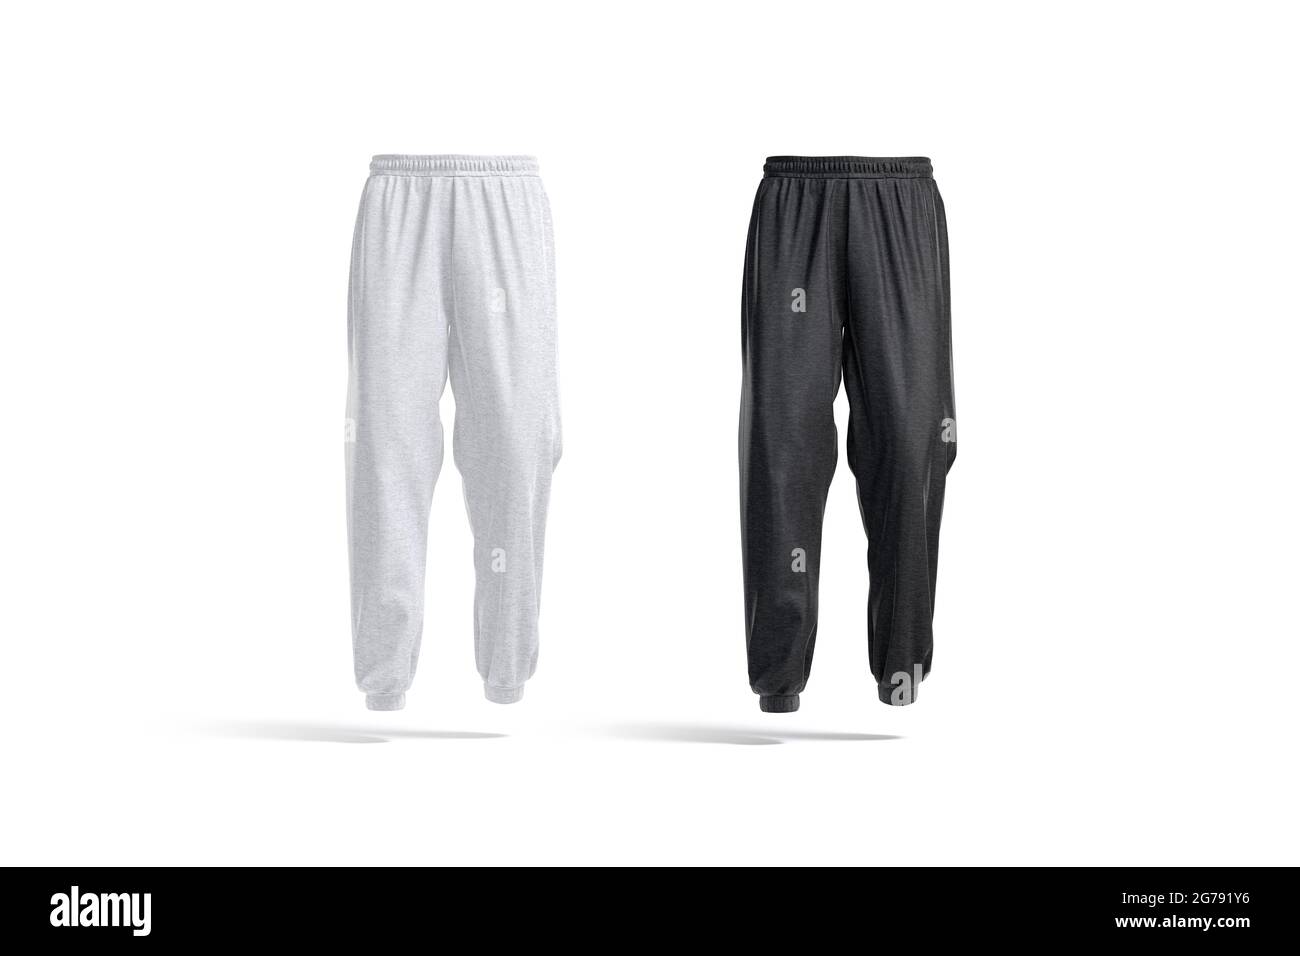 Blank black and white sport sweatpants mockup, front view, 3d